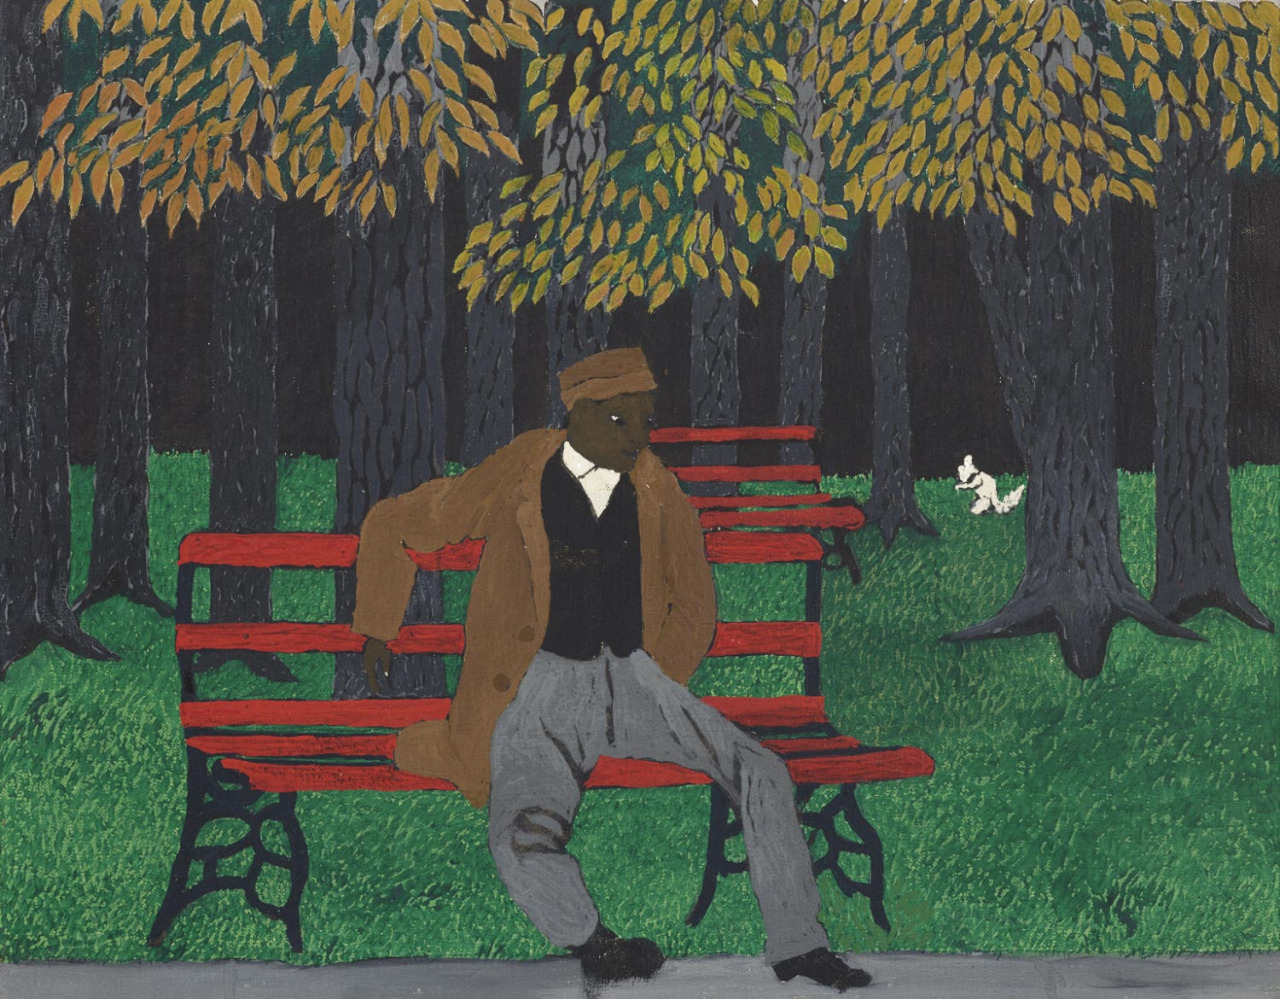 The Park Bench by Horace Pippin - 1946 - 33 × 45.7 cm Philadelphia Museum of Art